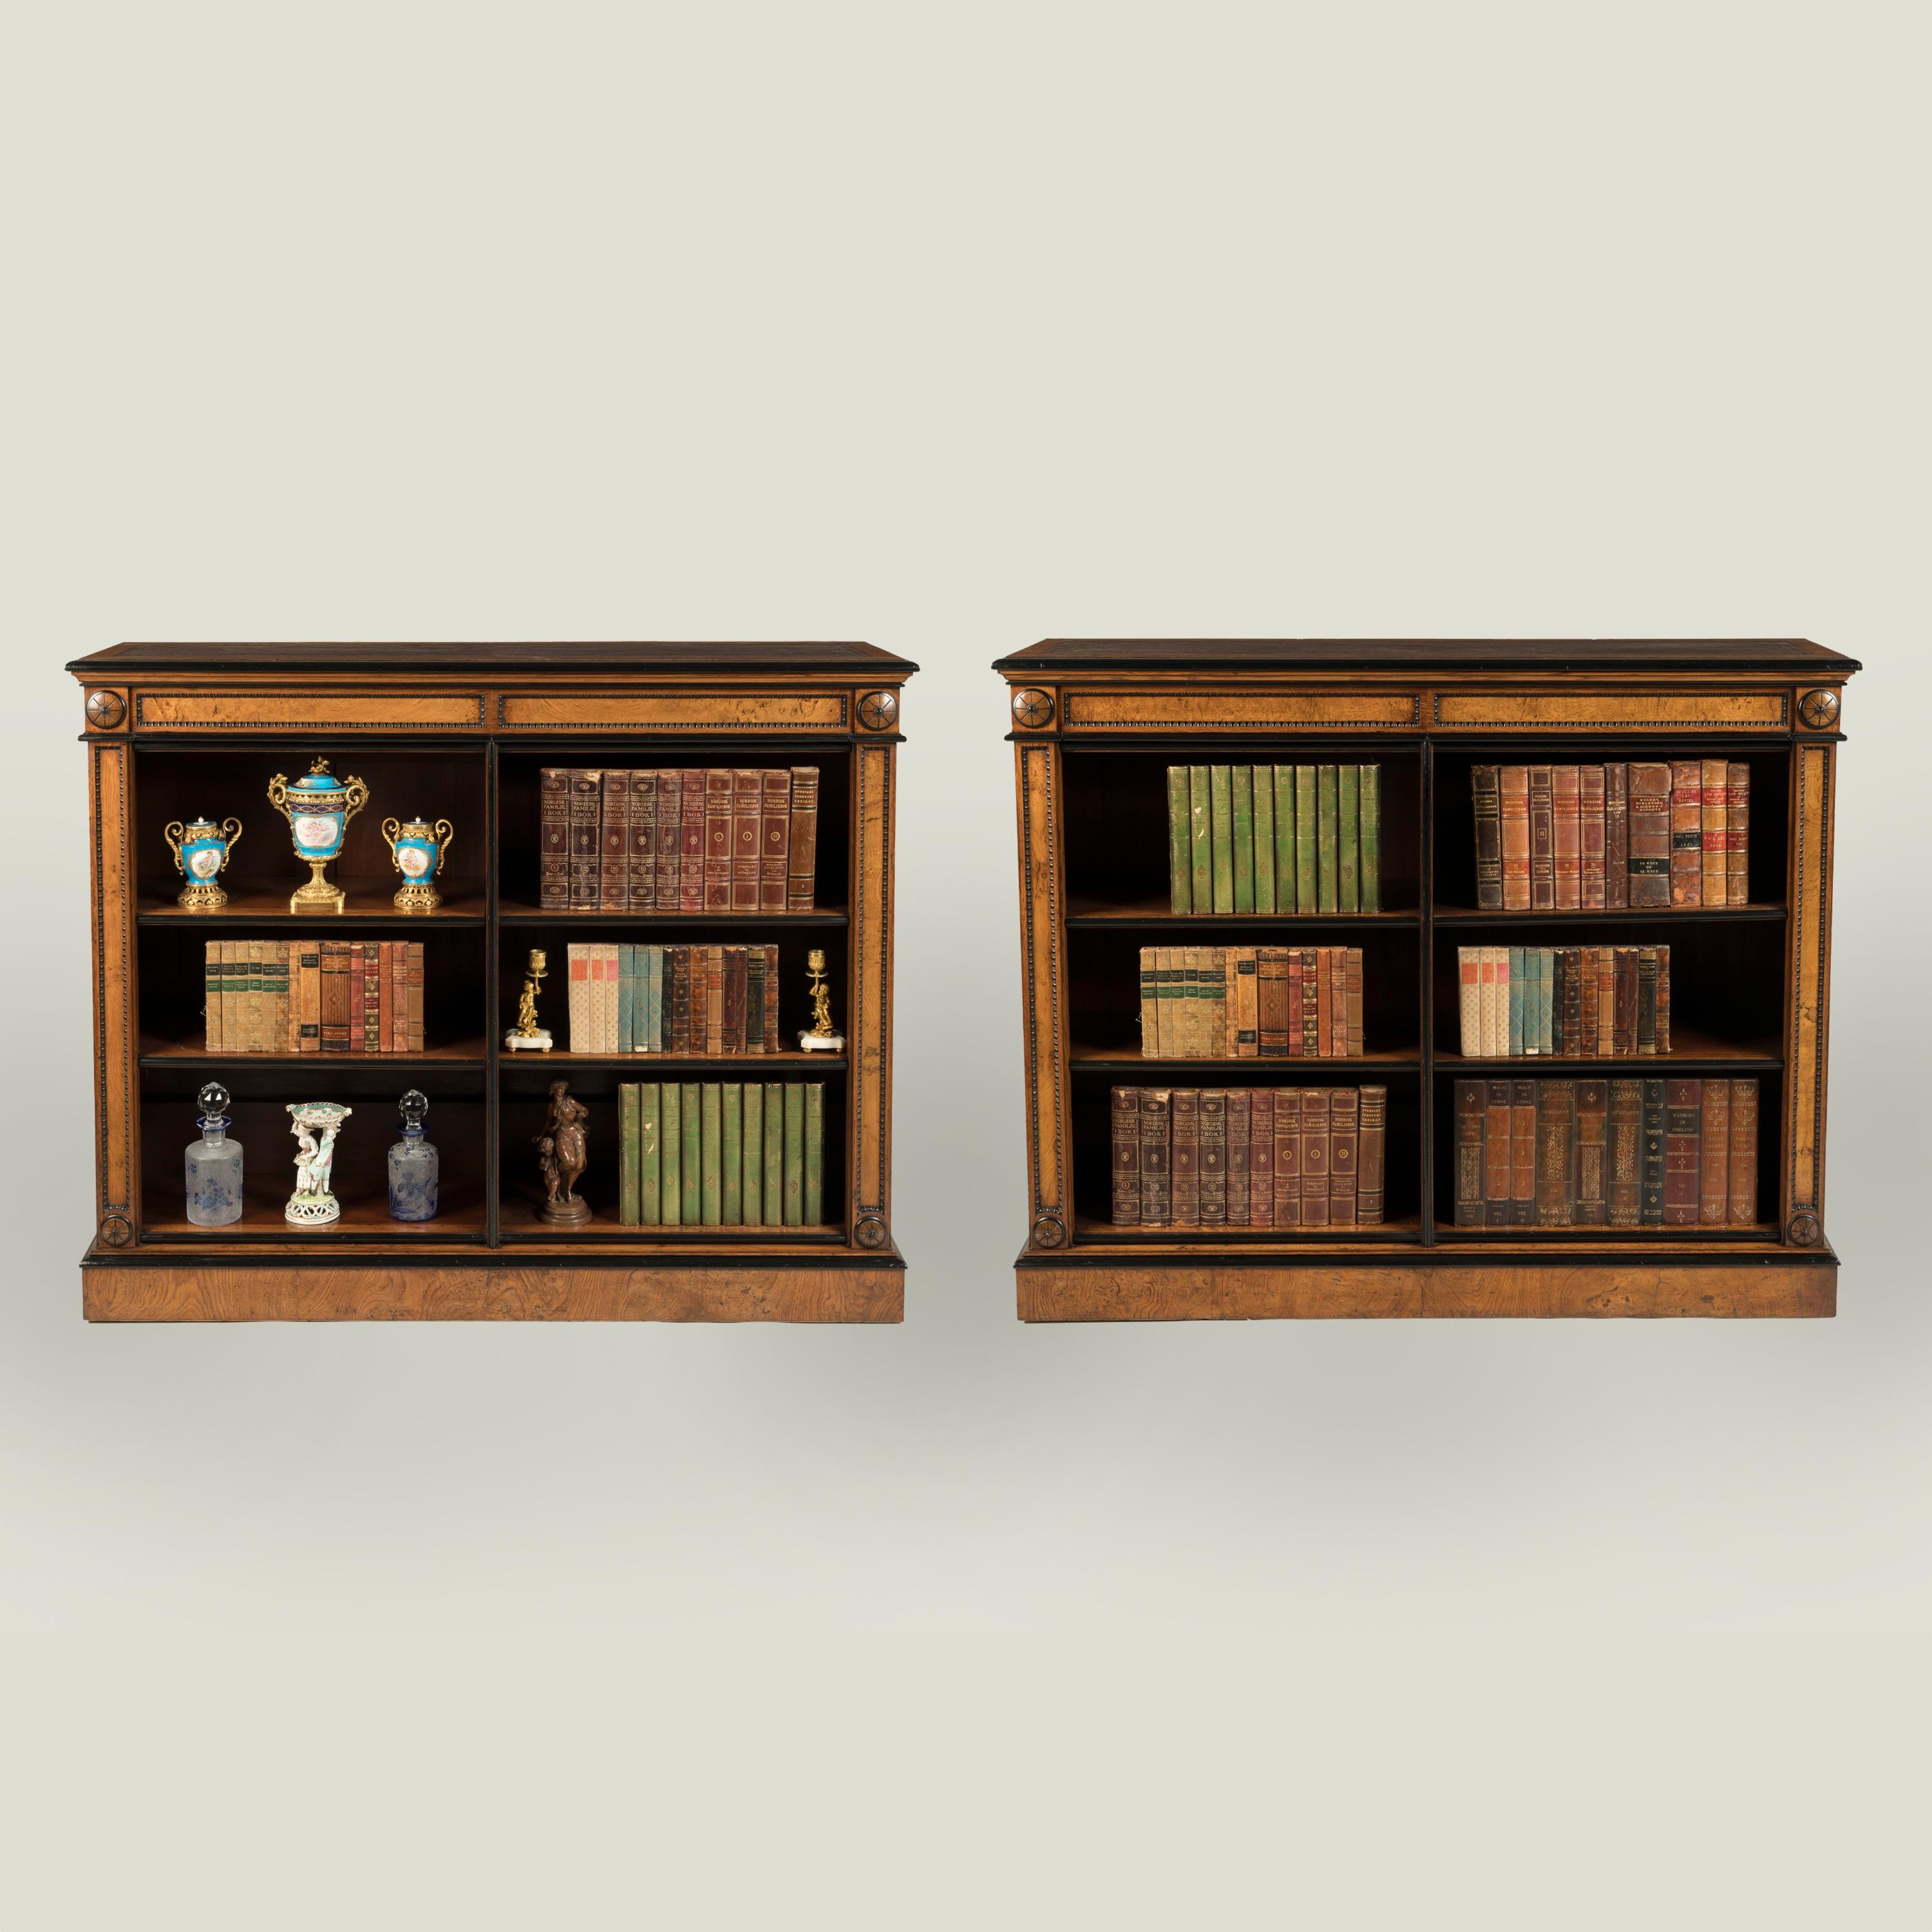 A Fine Pair of Oak Dwarf Bookcases

Constructed from oak with ebonised details; each open bookcase supported on a moulded plinth base; with an arrangement of adjustable shelves, the uprights with recessed panels, carved beaded moulding and with